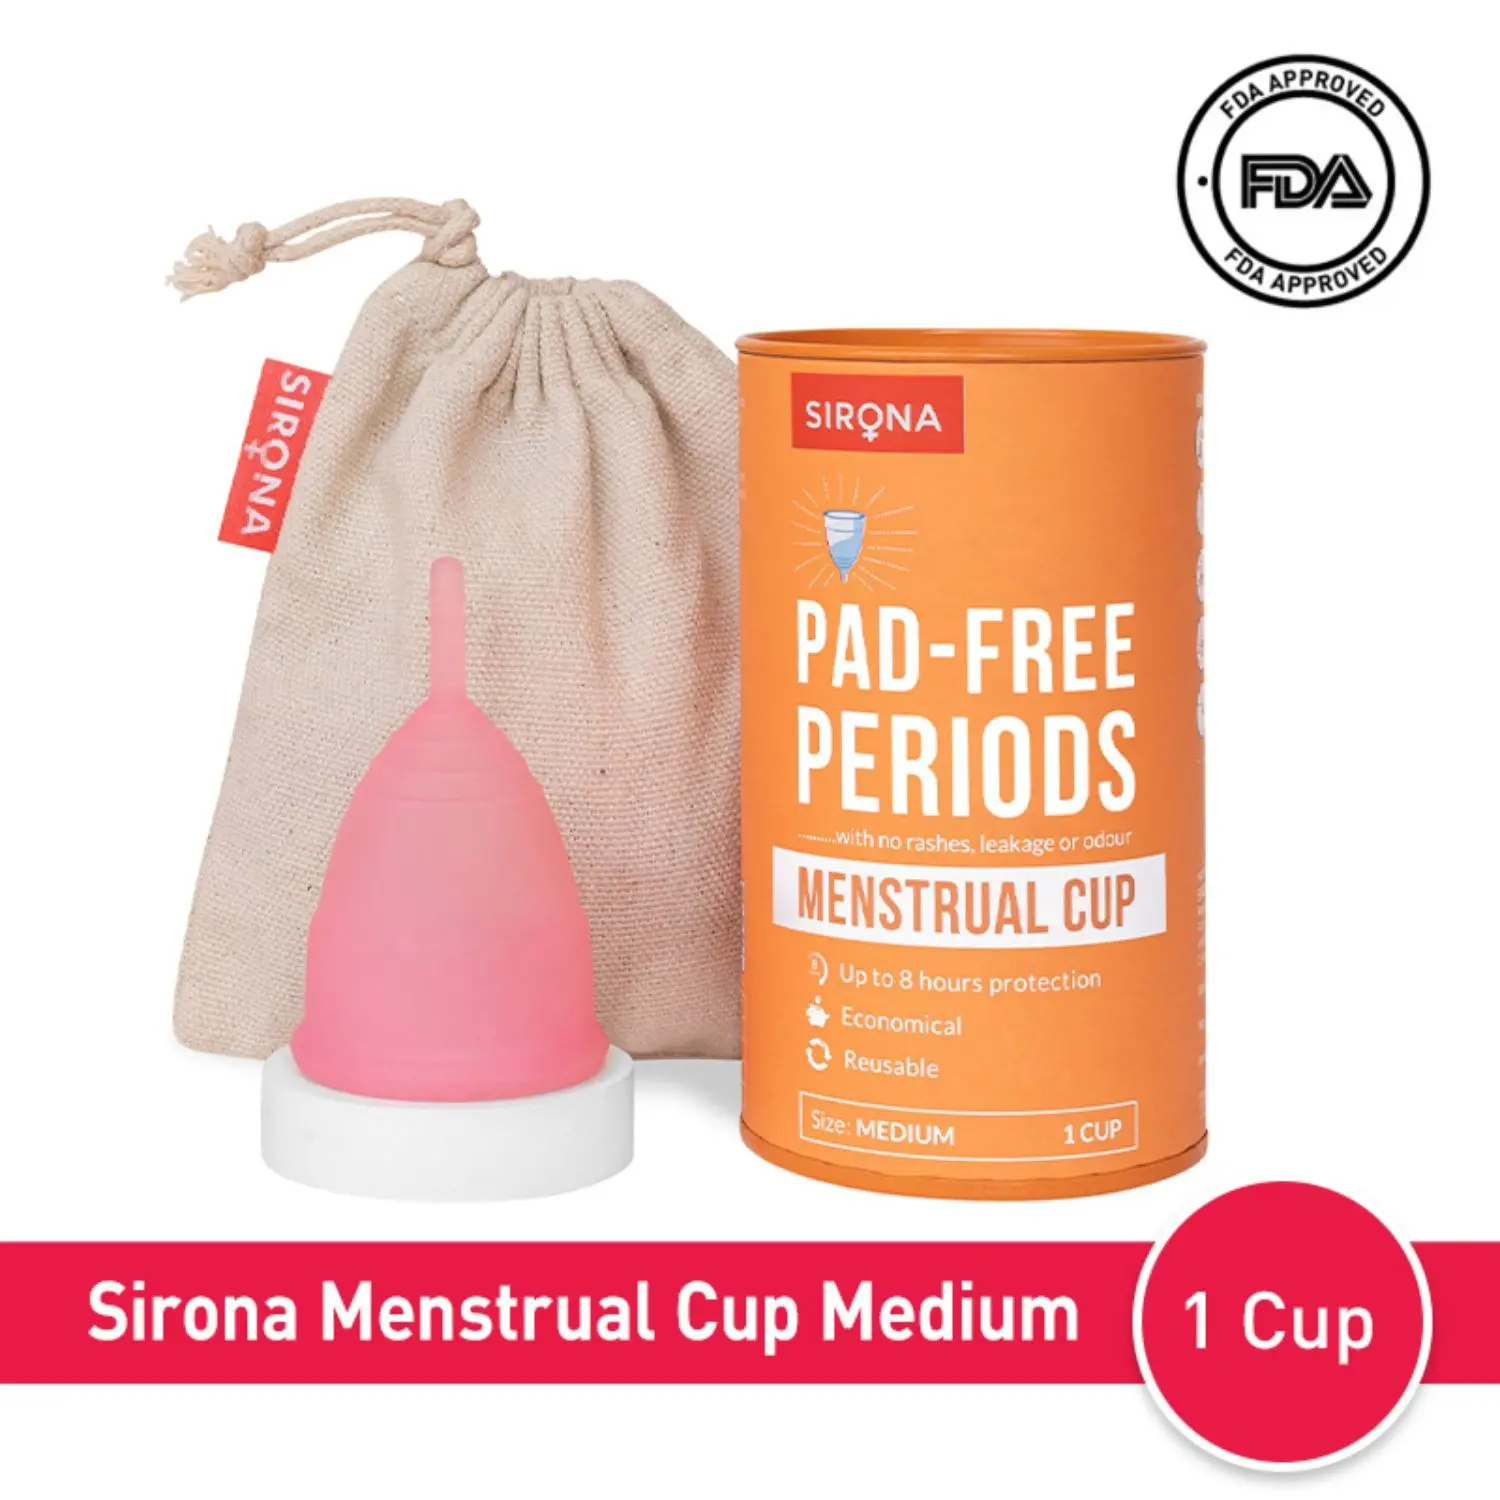 Sirona Reusable Menstrual Cup With no rashes, leakage or odour - Medium